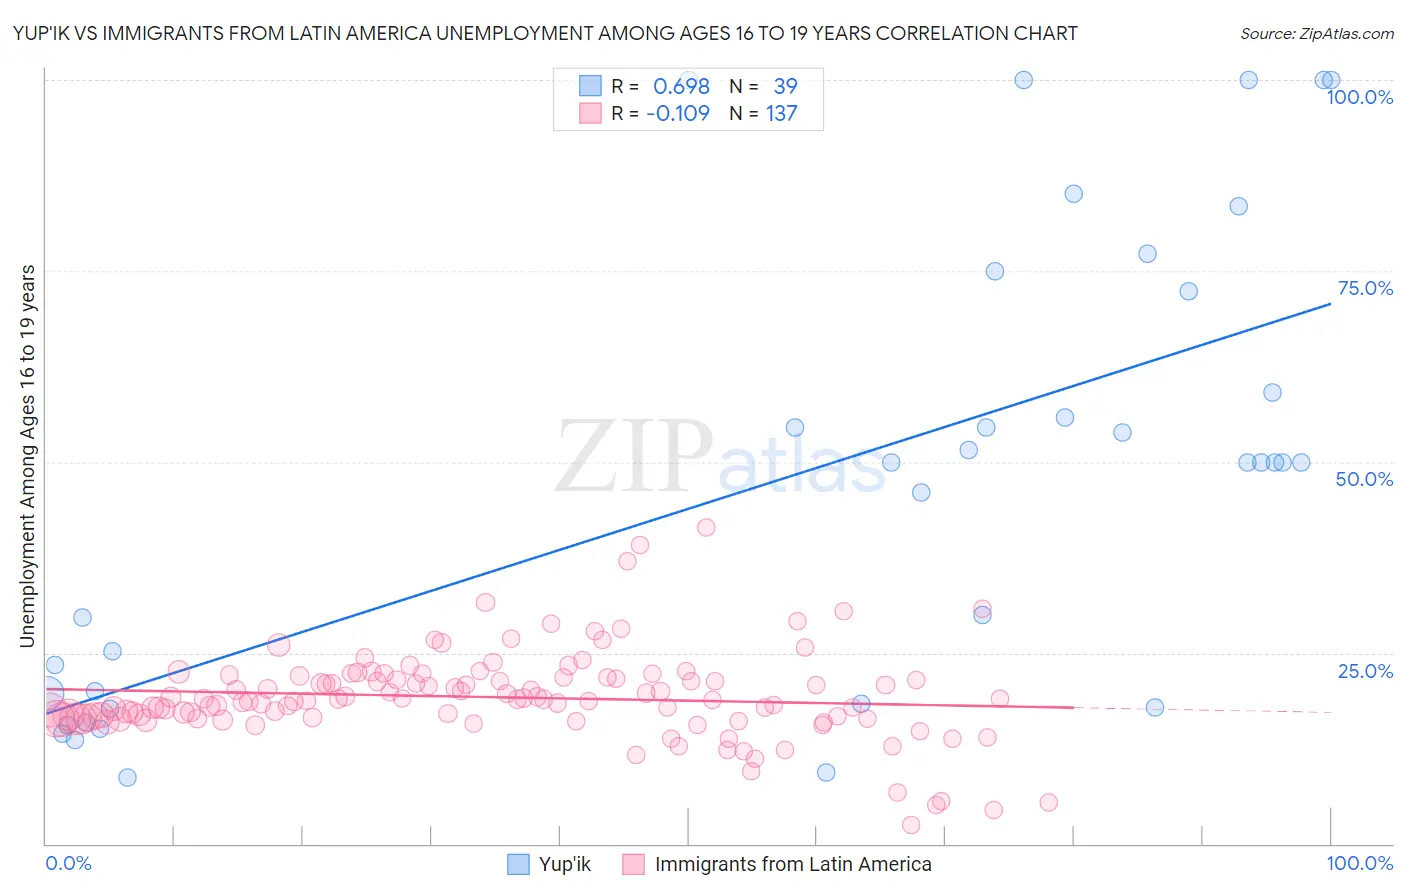 Yup'ik vs Immigrants from Latin America Unemployment Among Ages 16 to 19 years